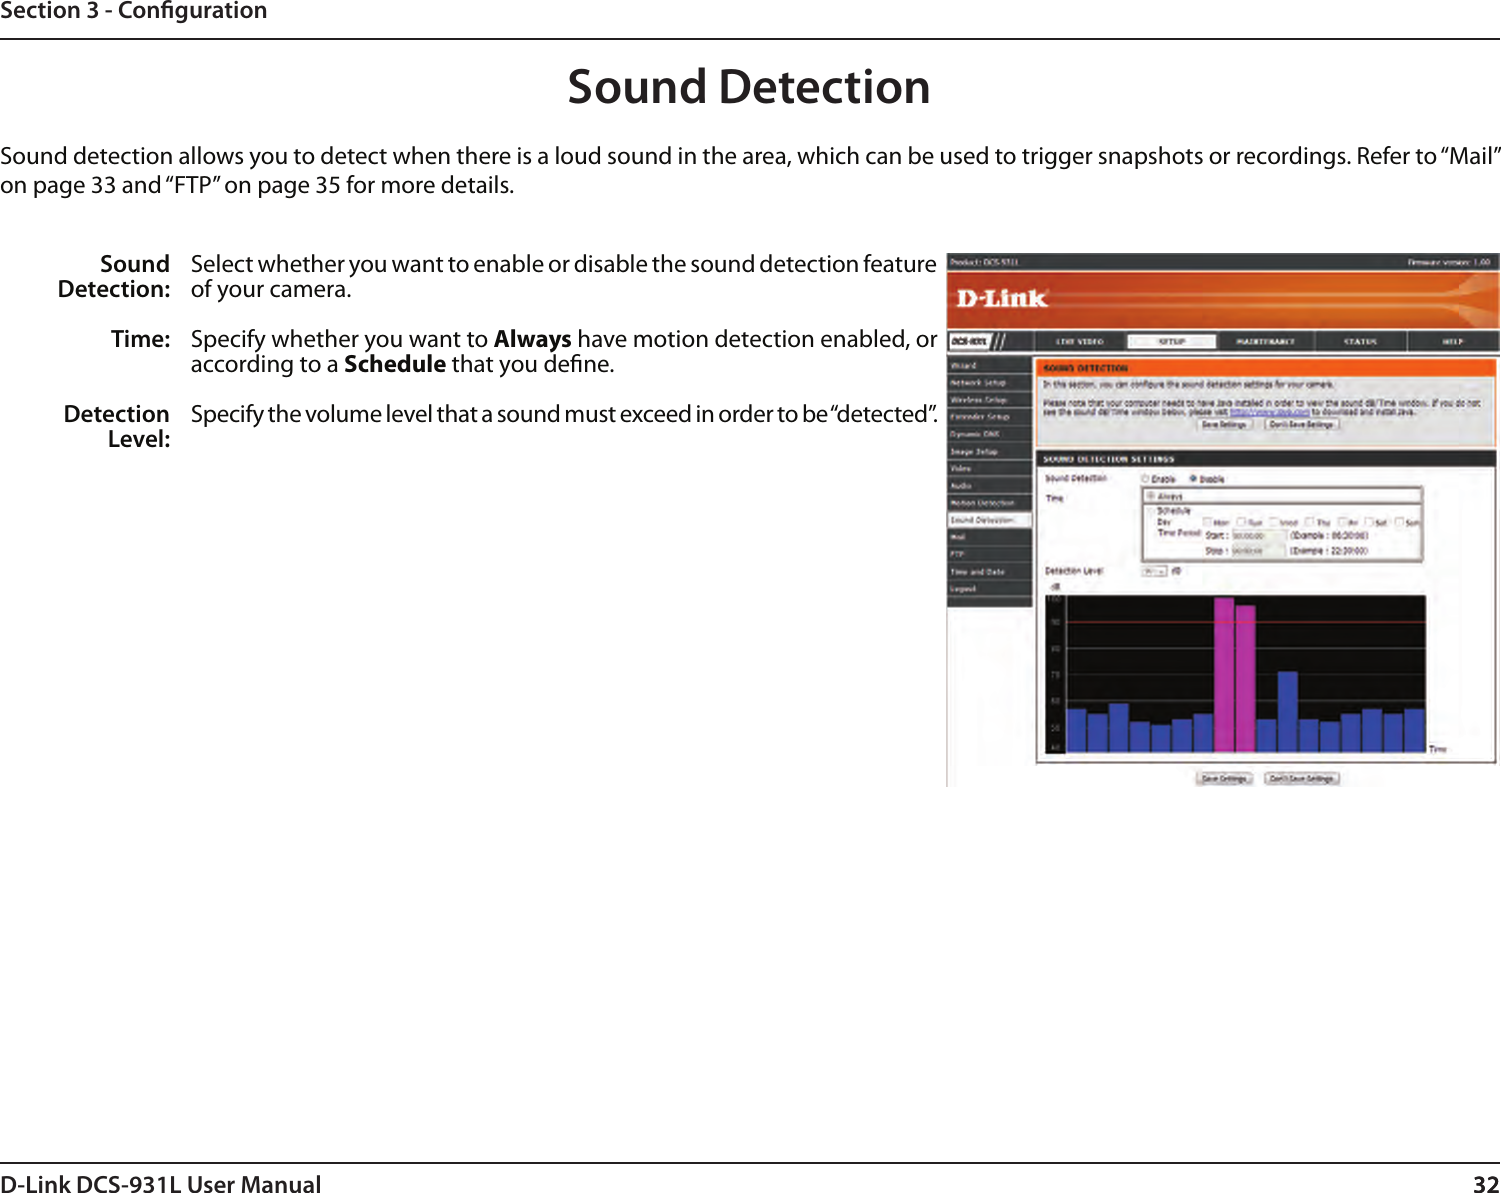 32D-Link DCS-931L User Manual 32Section 3 - CongurationSound DetectionSound detection allows you to detect when there is a loud sound in the area, which can be used to trigger snapshots or recordings. Refer to “Mail” on page 33 and “FTP” on page 35 for more details.Sound Detection:Time:Detection Level:Select whether you want to enable or disable the sound detection feature of your camera.Specify whether you want to Always have motion detection enabled, or according to a Schedule that you dene.Specify the volume level that a sound must exceed in order to be “detected”.